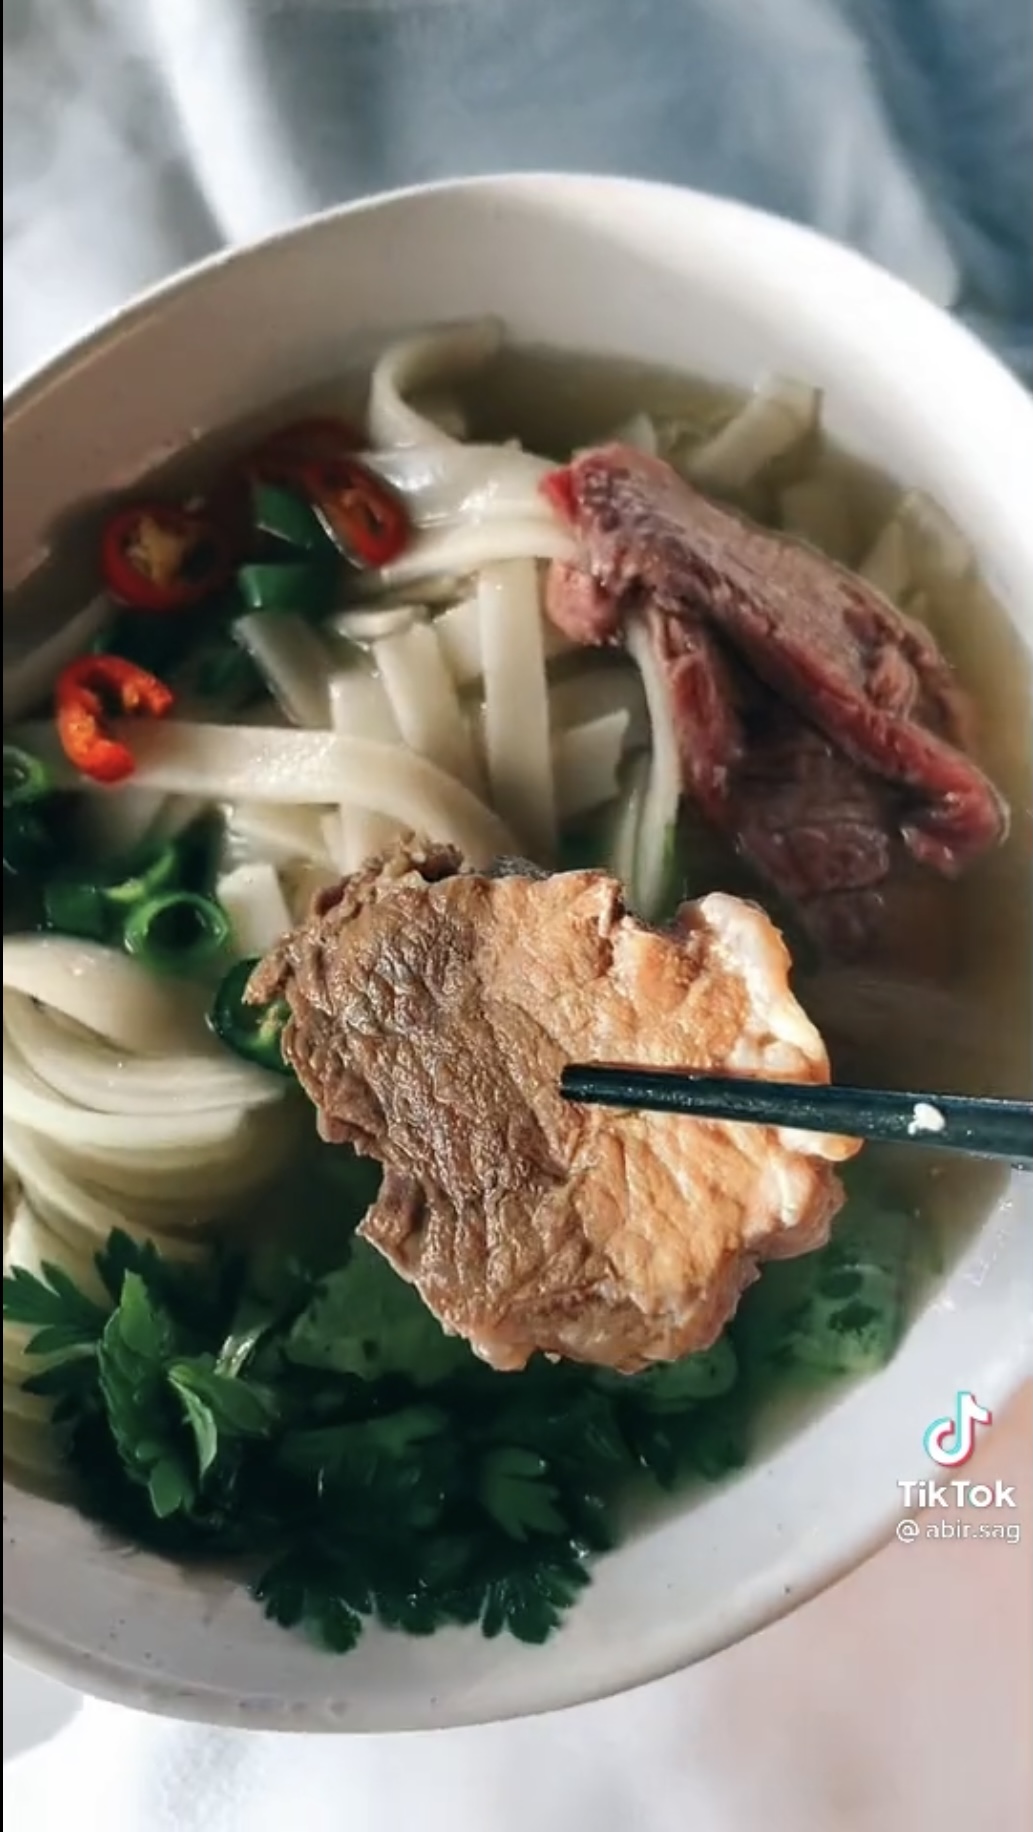 A screenshot shows Abir Saghir putting a piece of beef flank into a bowl of Vietnamese pho she makes in a video on her @abir.sag TikTok channel.